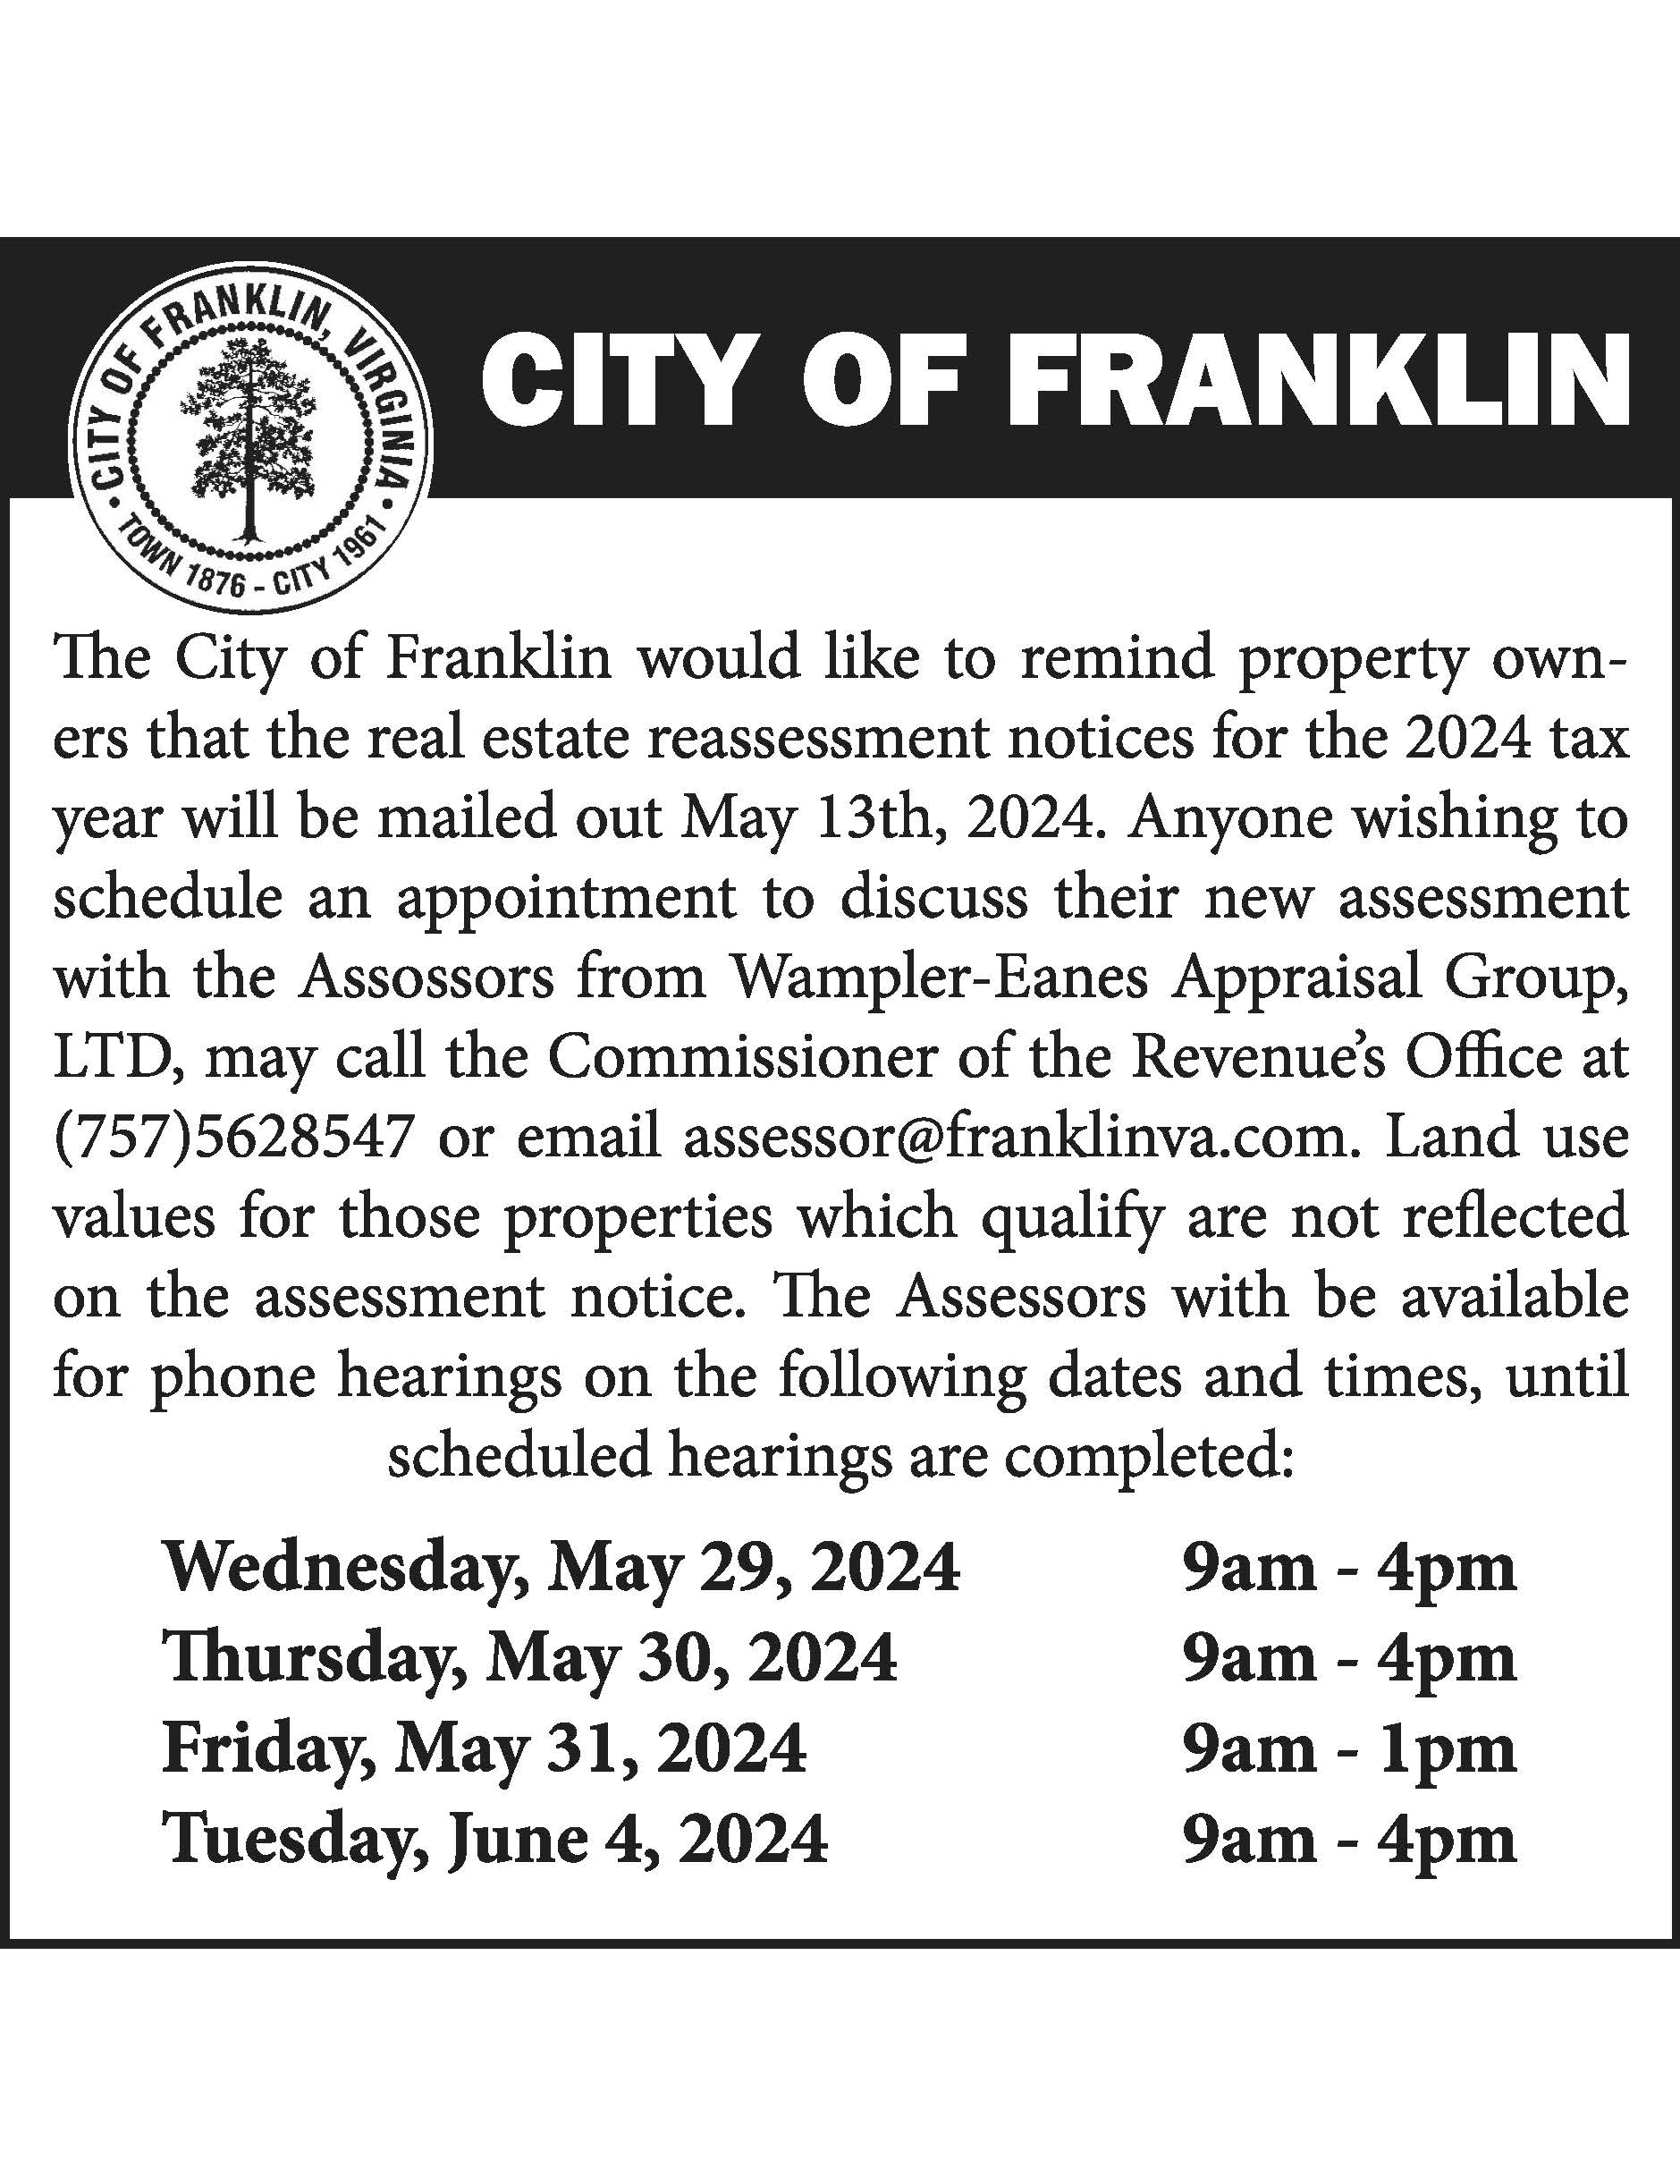 City of Franklin Real Estate Notices